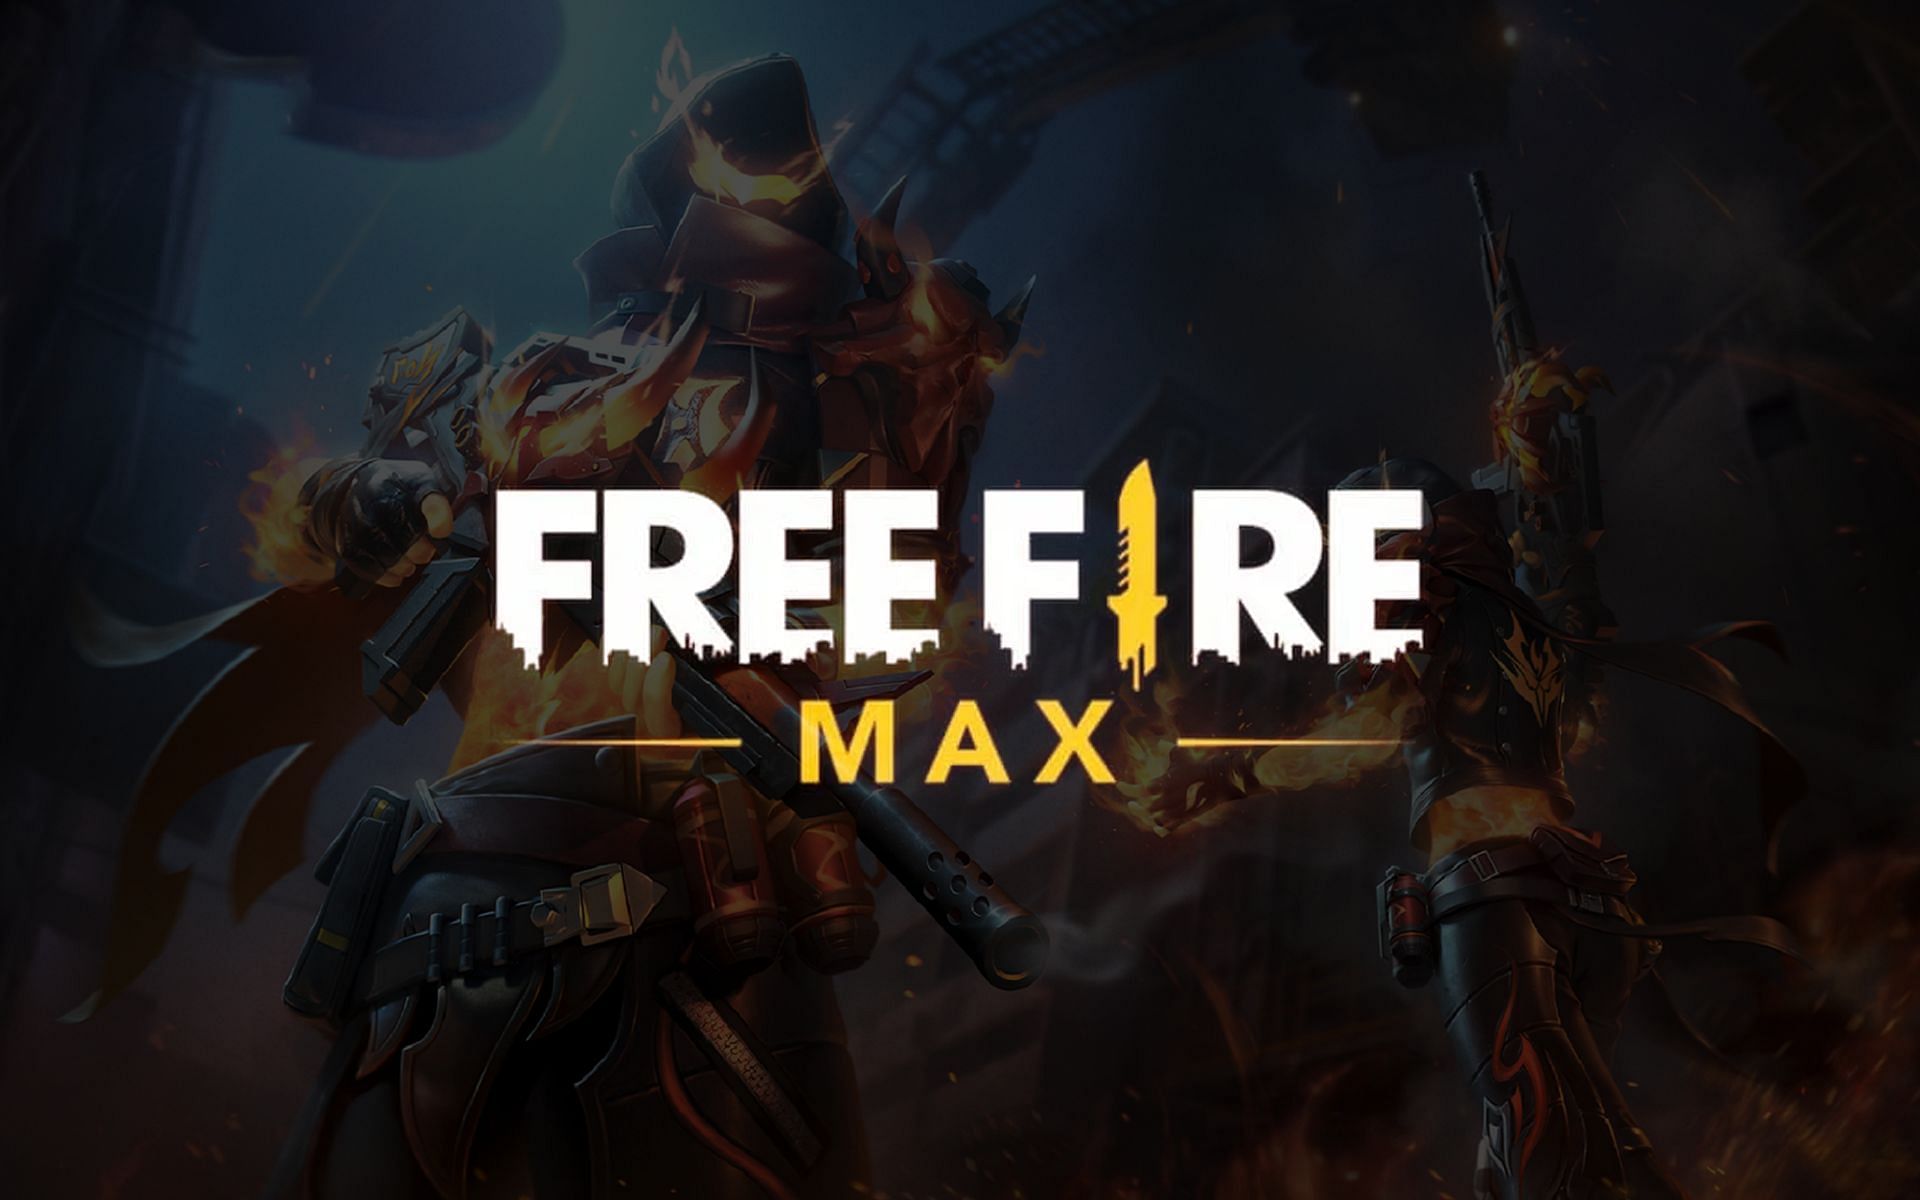 Follow these simple tips to reach the Heroic Tier in Free Fire MAX (Image via Garena Free Fire)